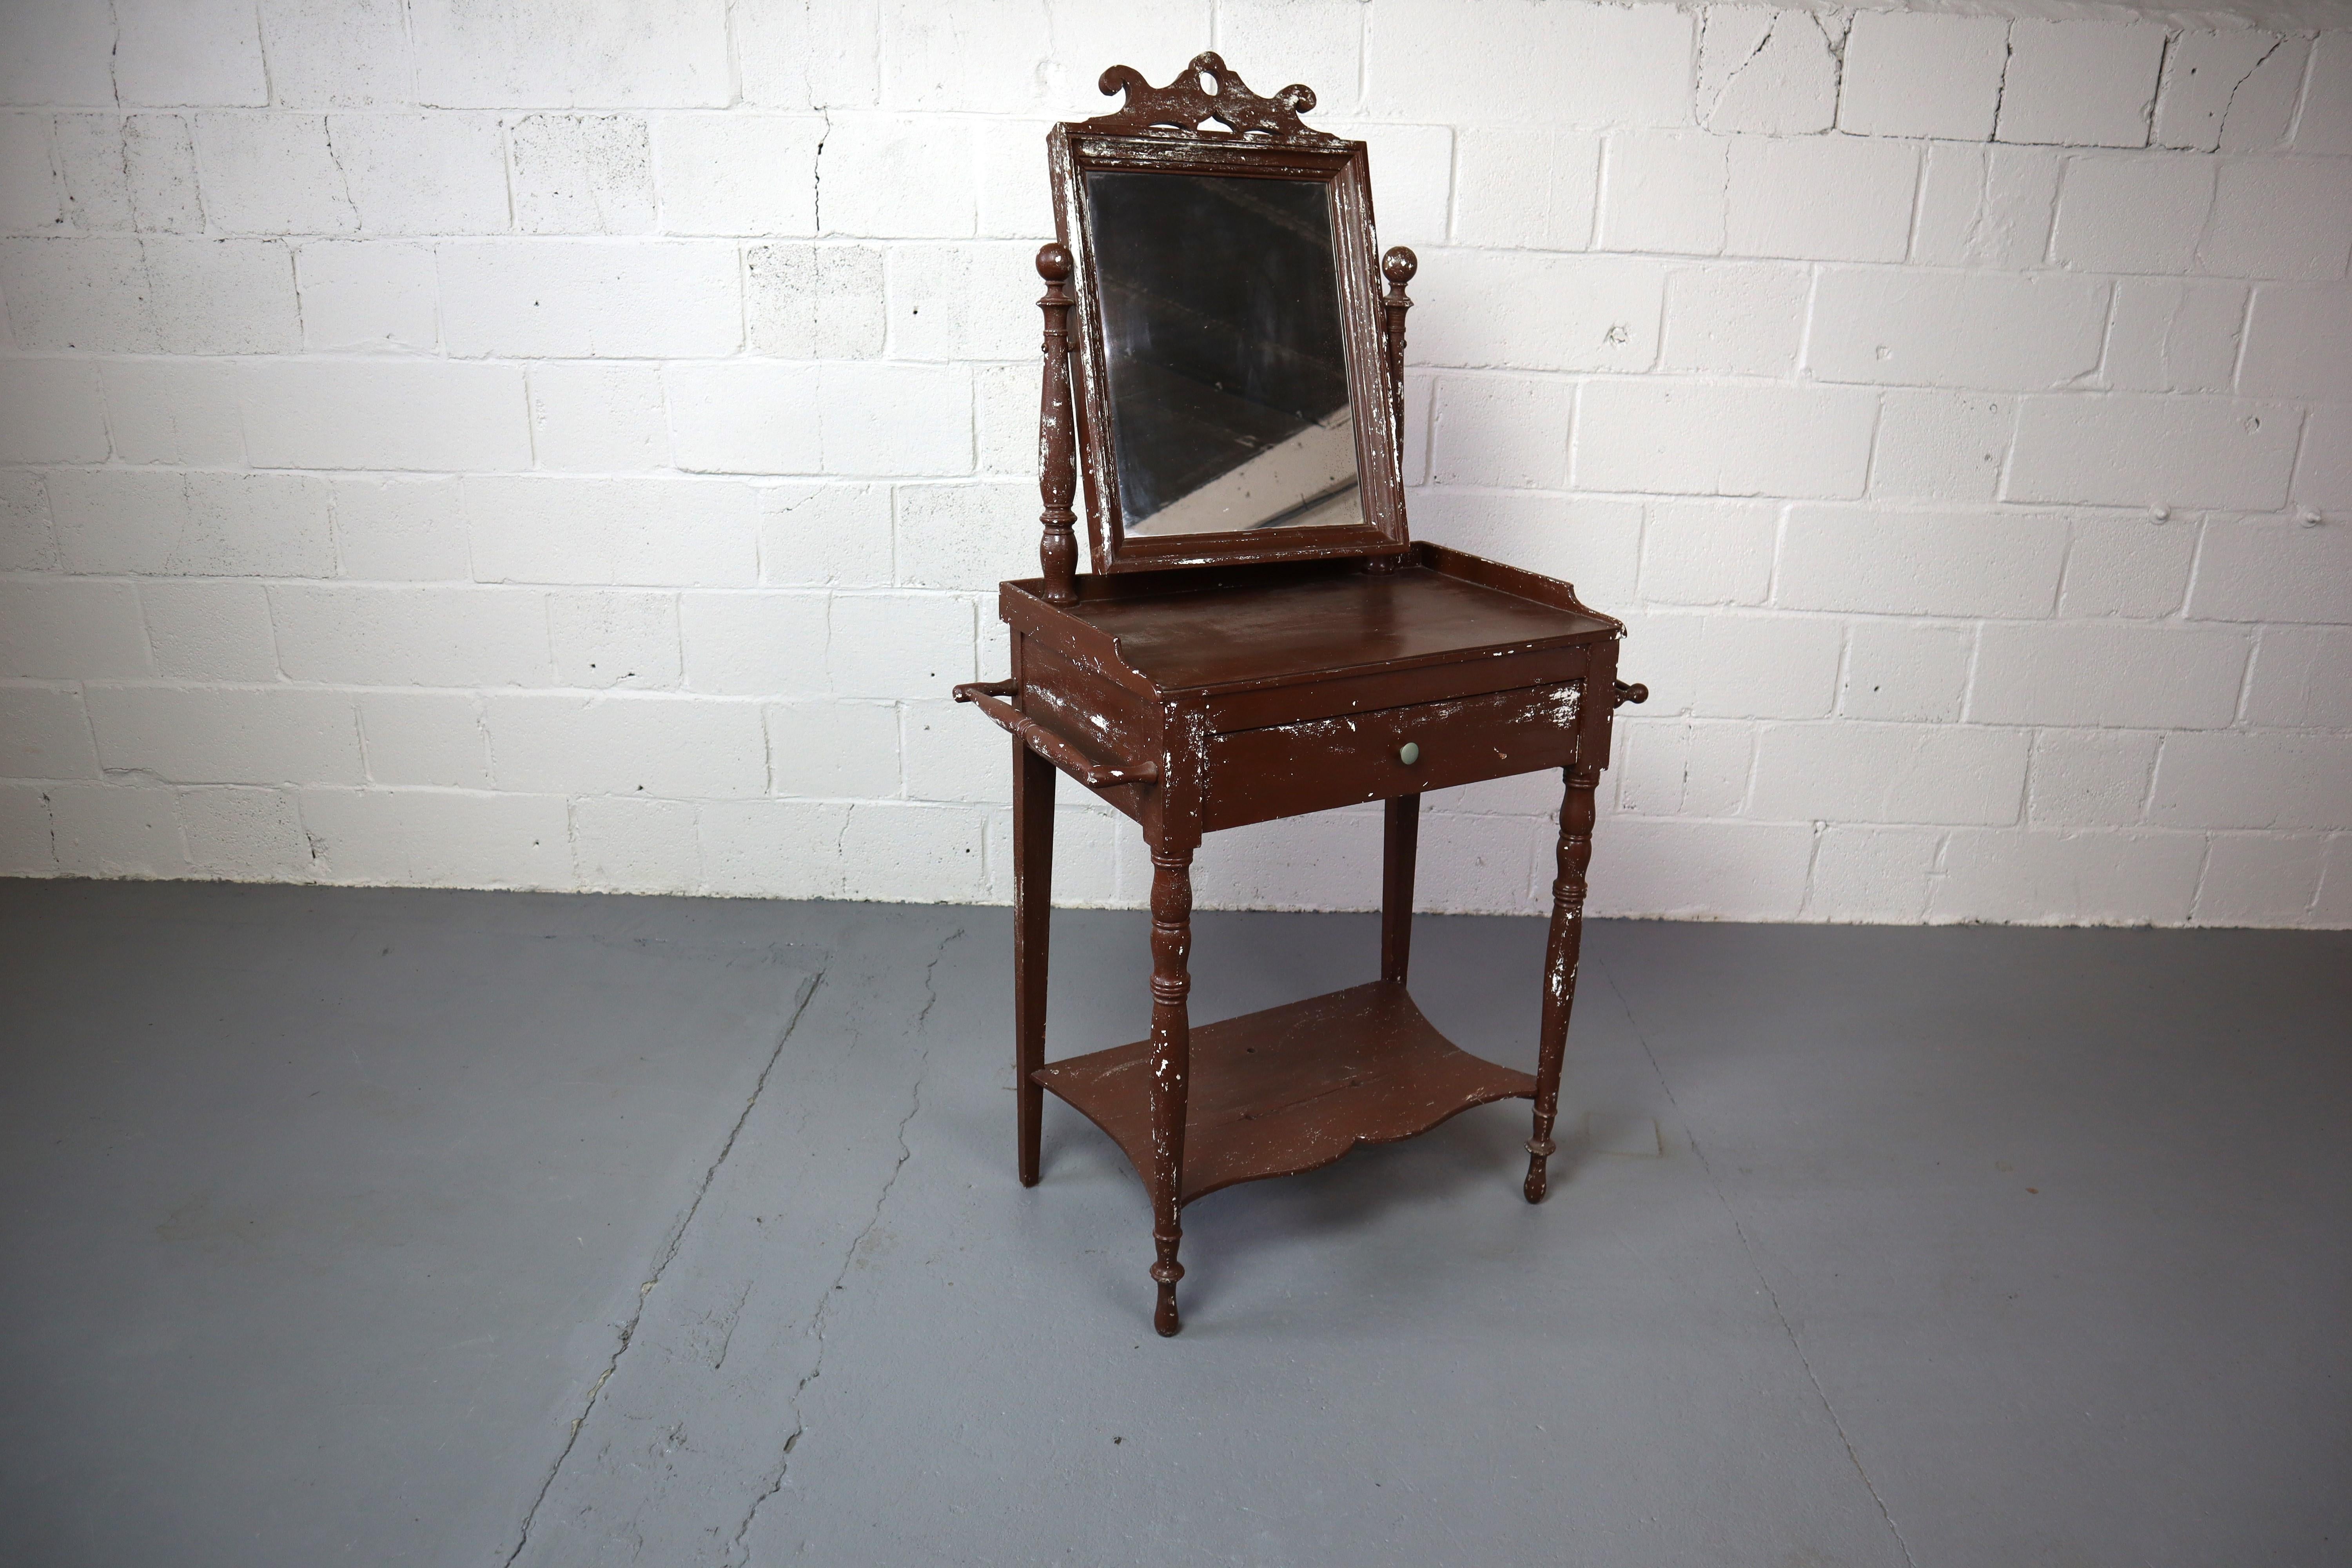 Old rustic French dressing table with weathered paint, weathered mirror and drawer.